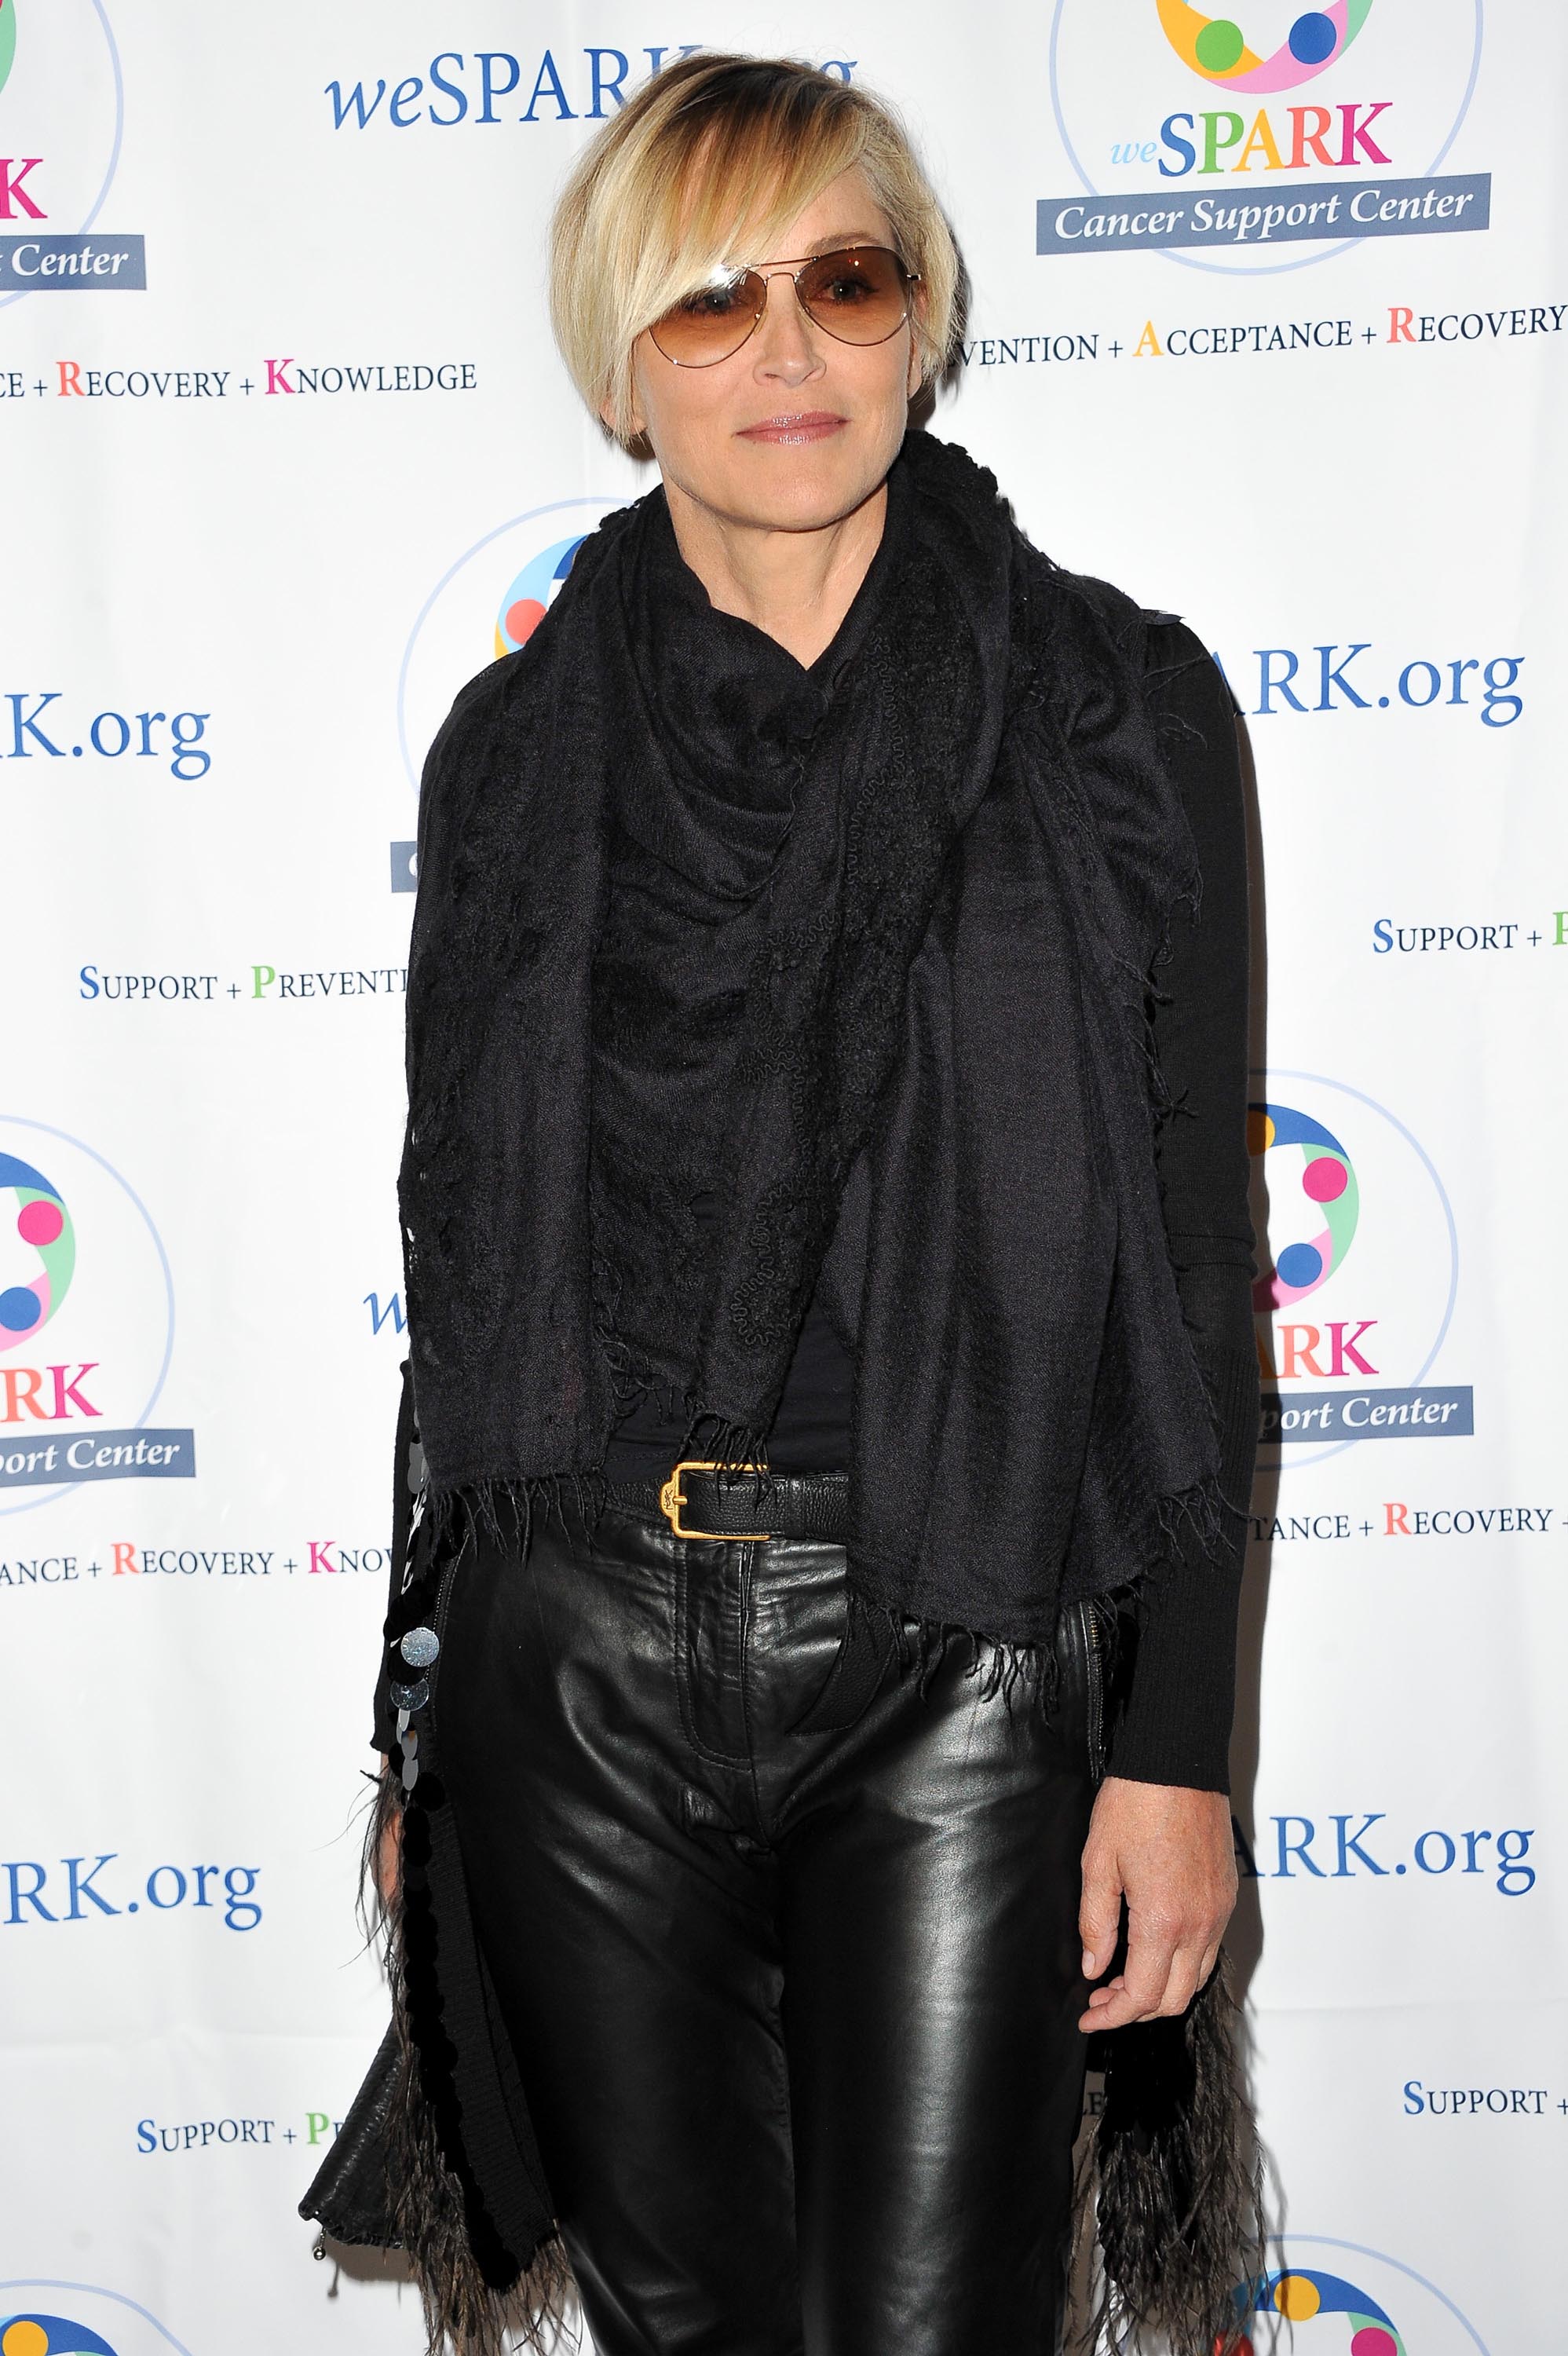 Sharon Stone attends the weSPARK Comedy Night